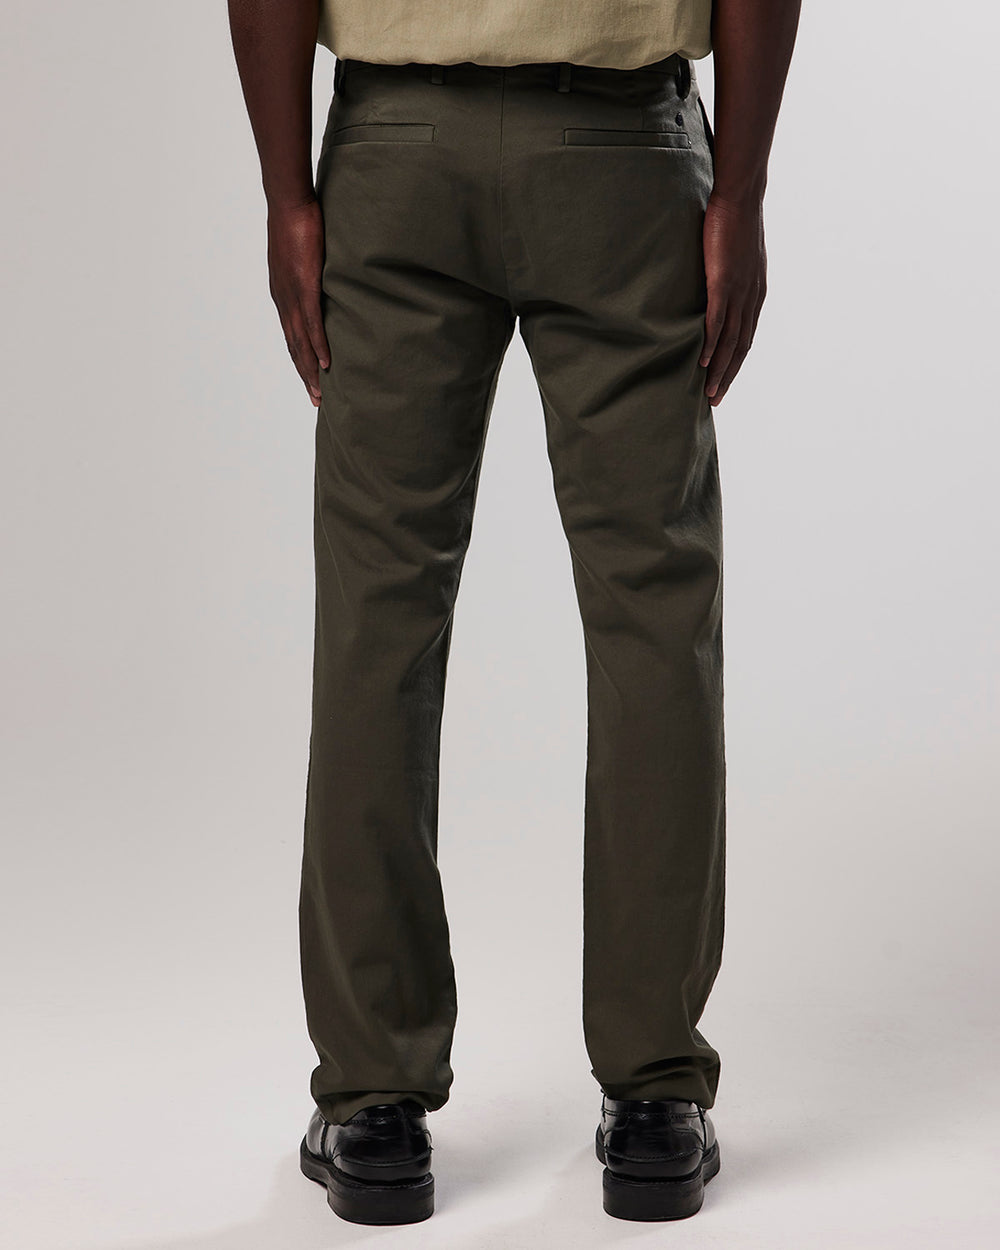 NN07 - Theo 1420 Pant in Army | Buster McGee